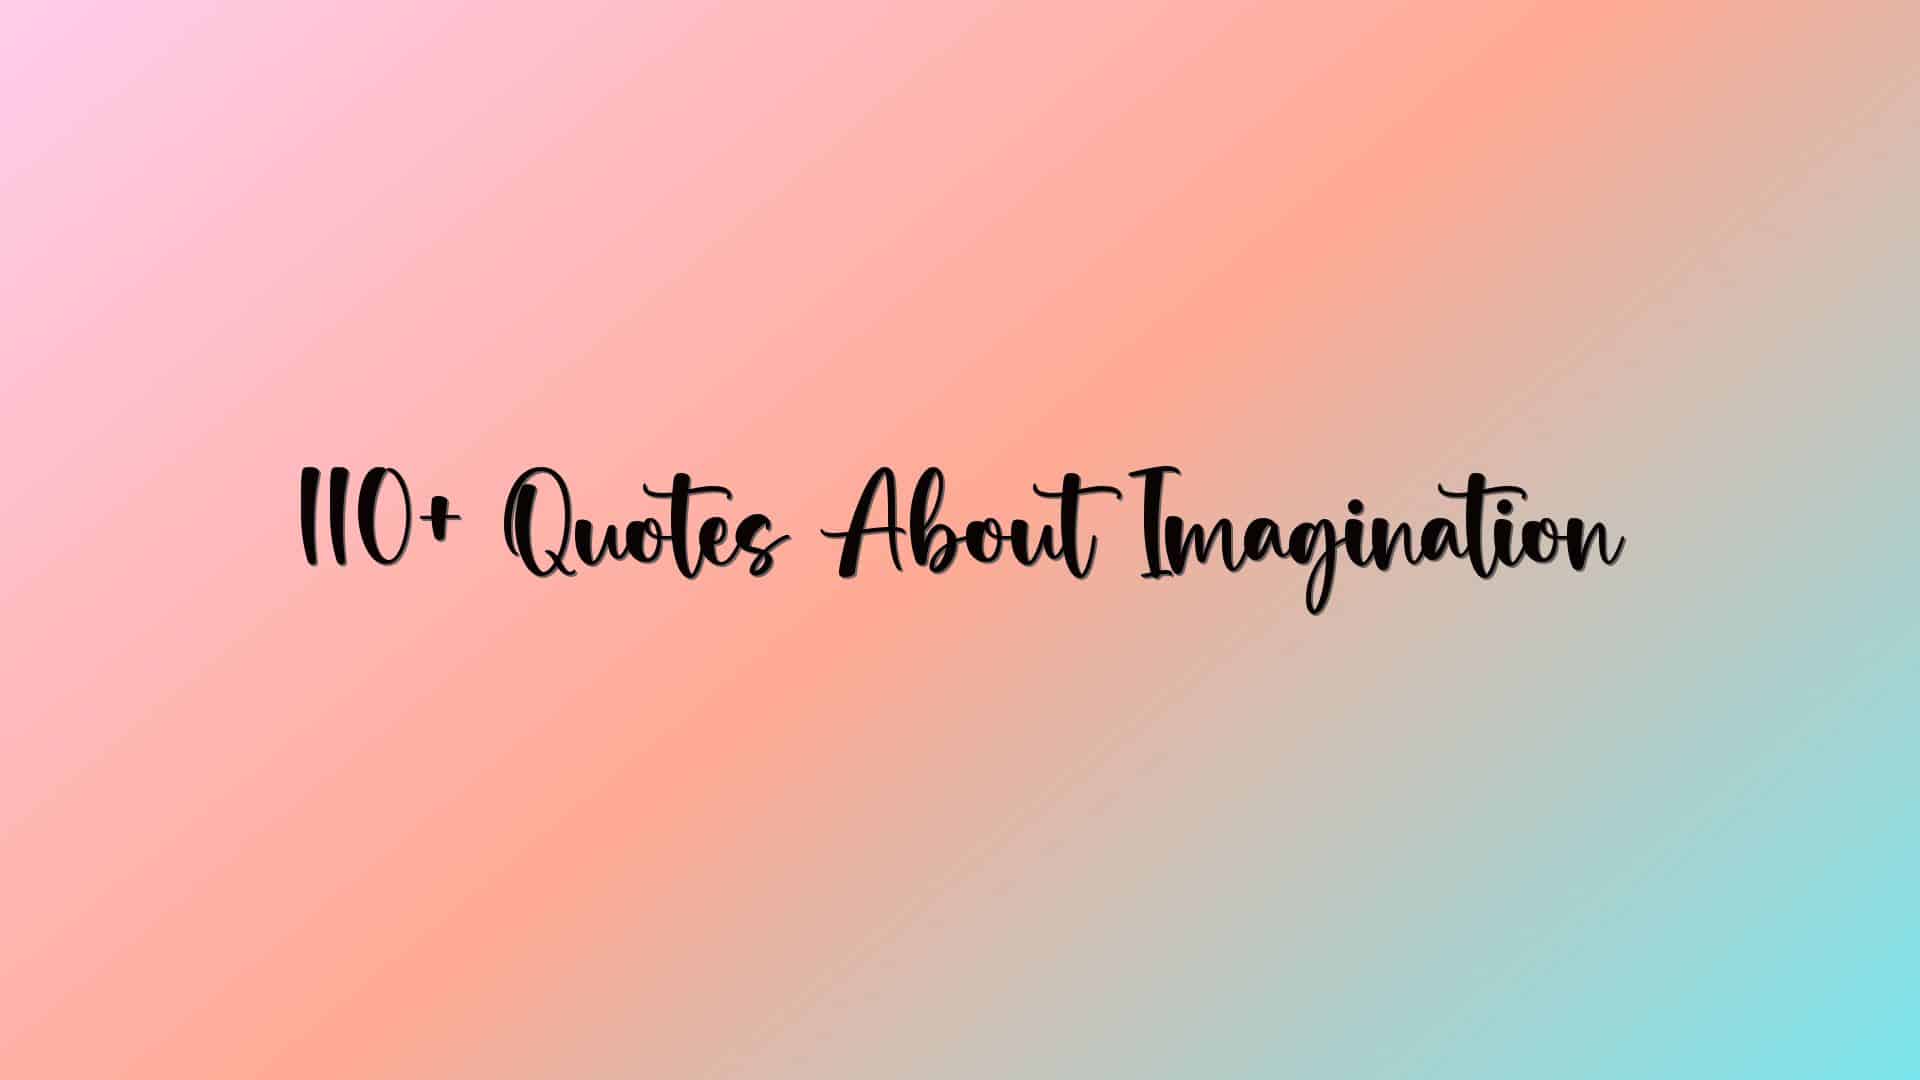 110+ Quotes About Imagination